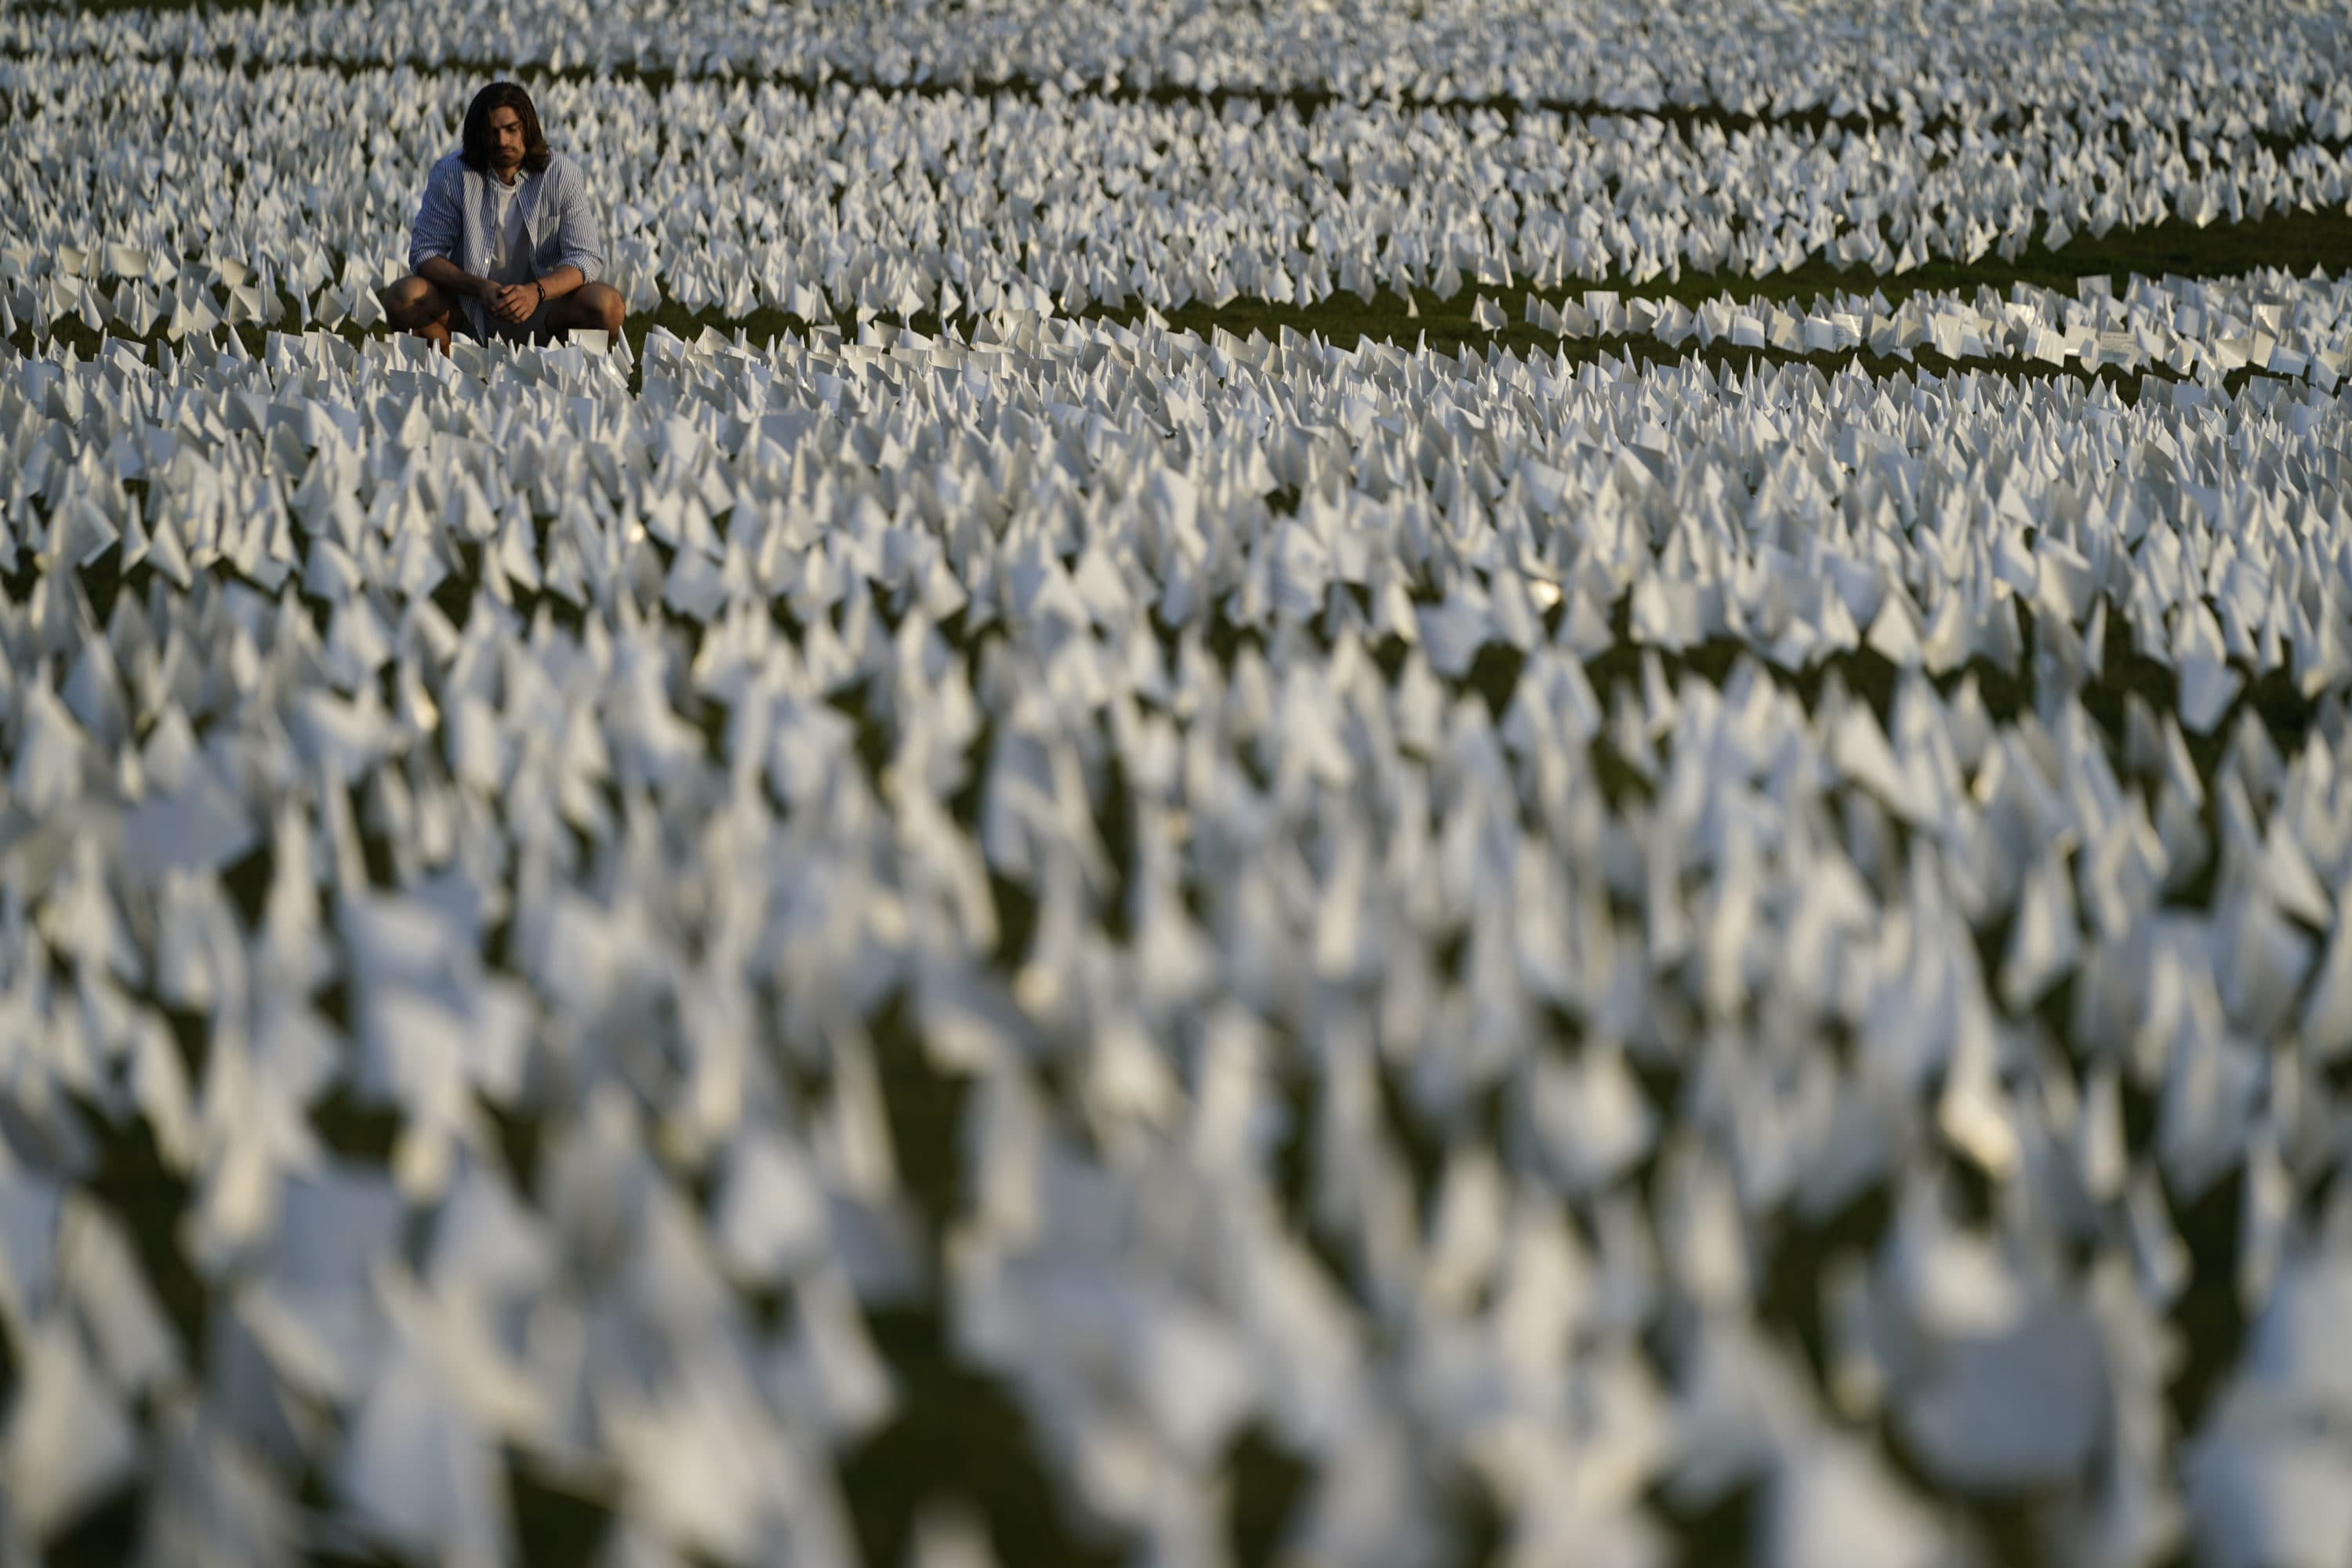 A person looks at white flags that are part of artist Suzanne Brennan Firstenberg's temporary art installation, &quot;In America: Remember,&quot; in remembrance of Americans who have died of COVID-19, on the National Mall in Washington on Sept. 17, 2021. (Brynn Anderson/AP)